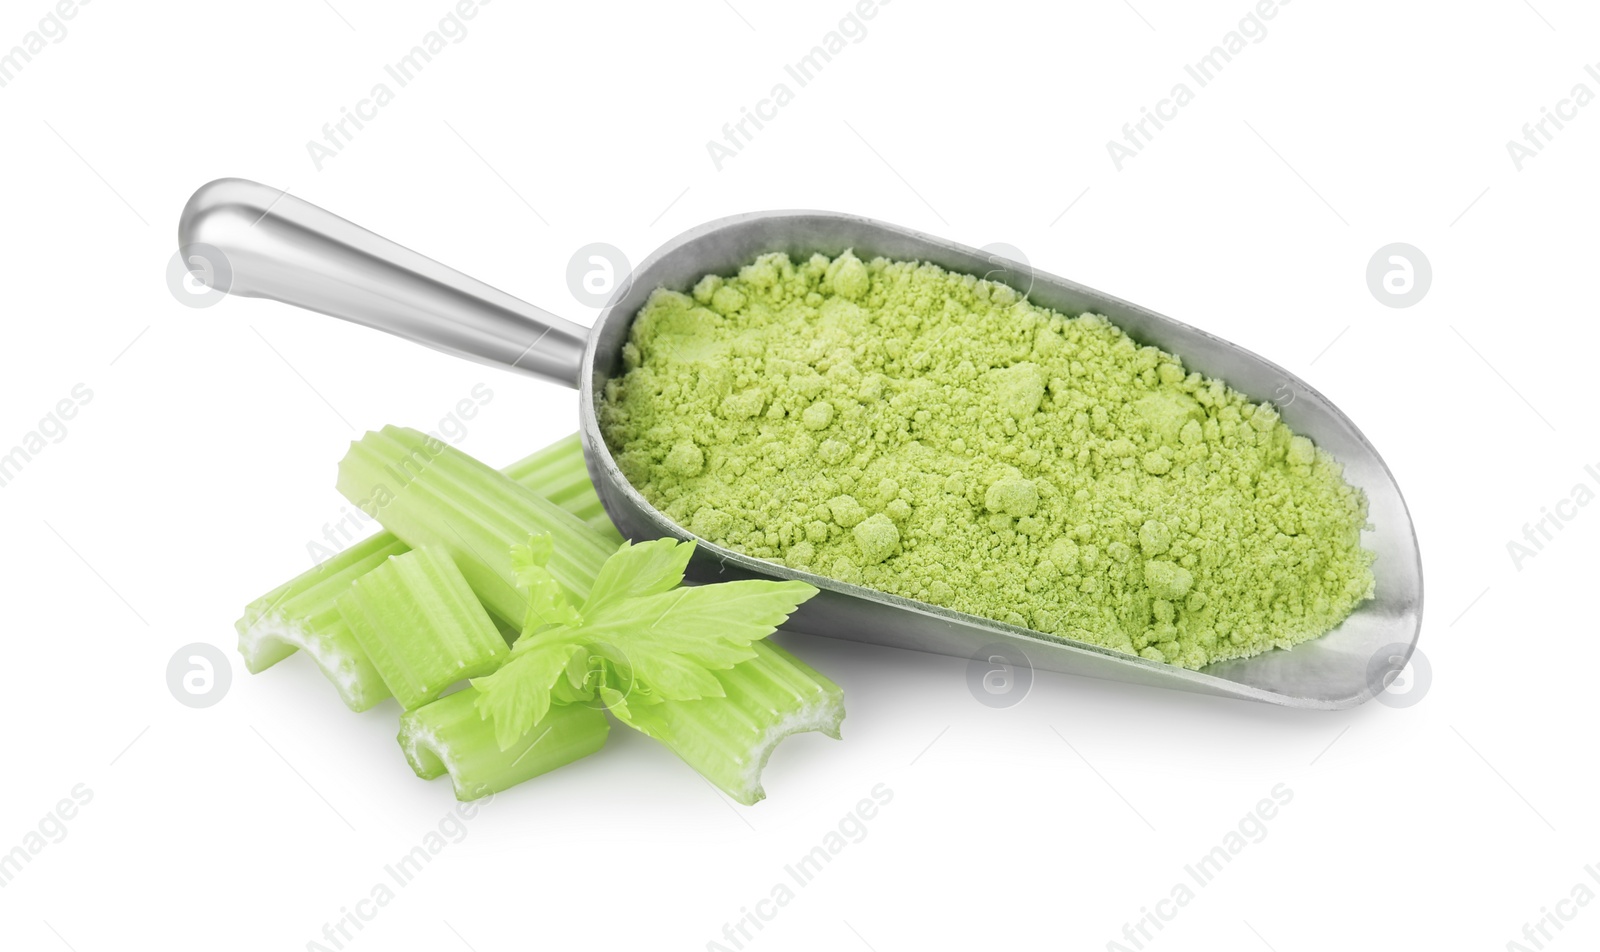 Photo of Scoop of celery powder and fresh cut stalk isolated on white